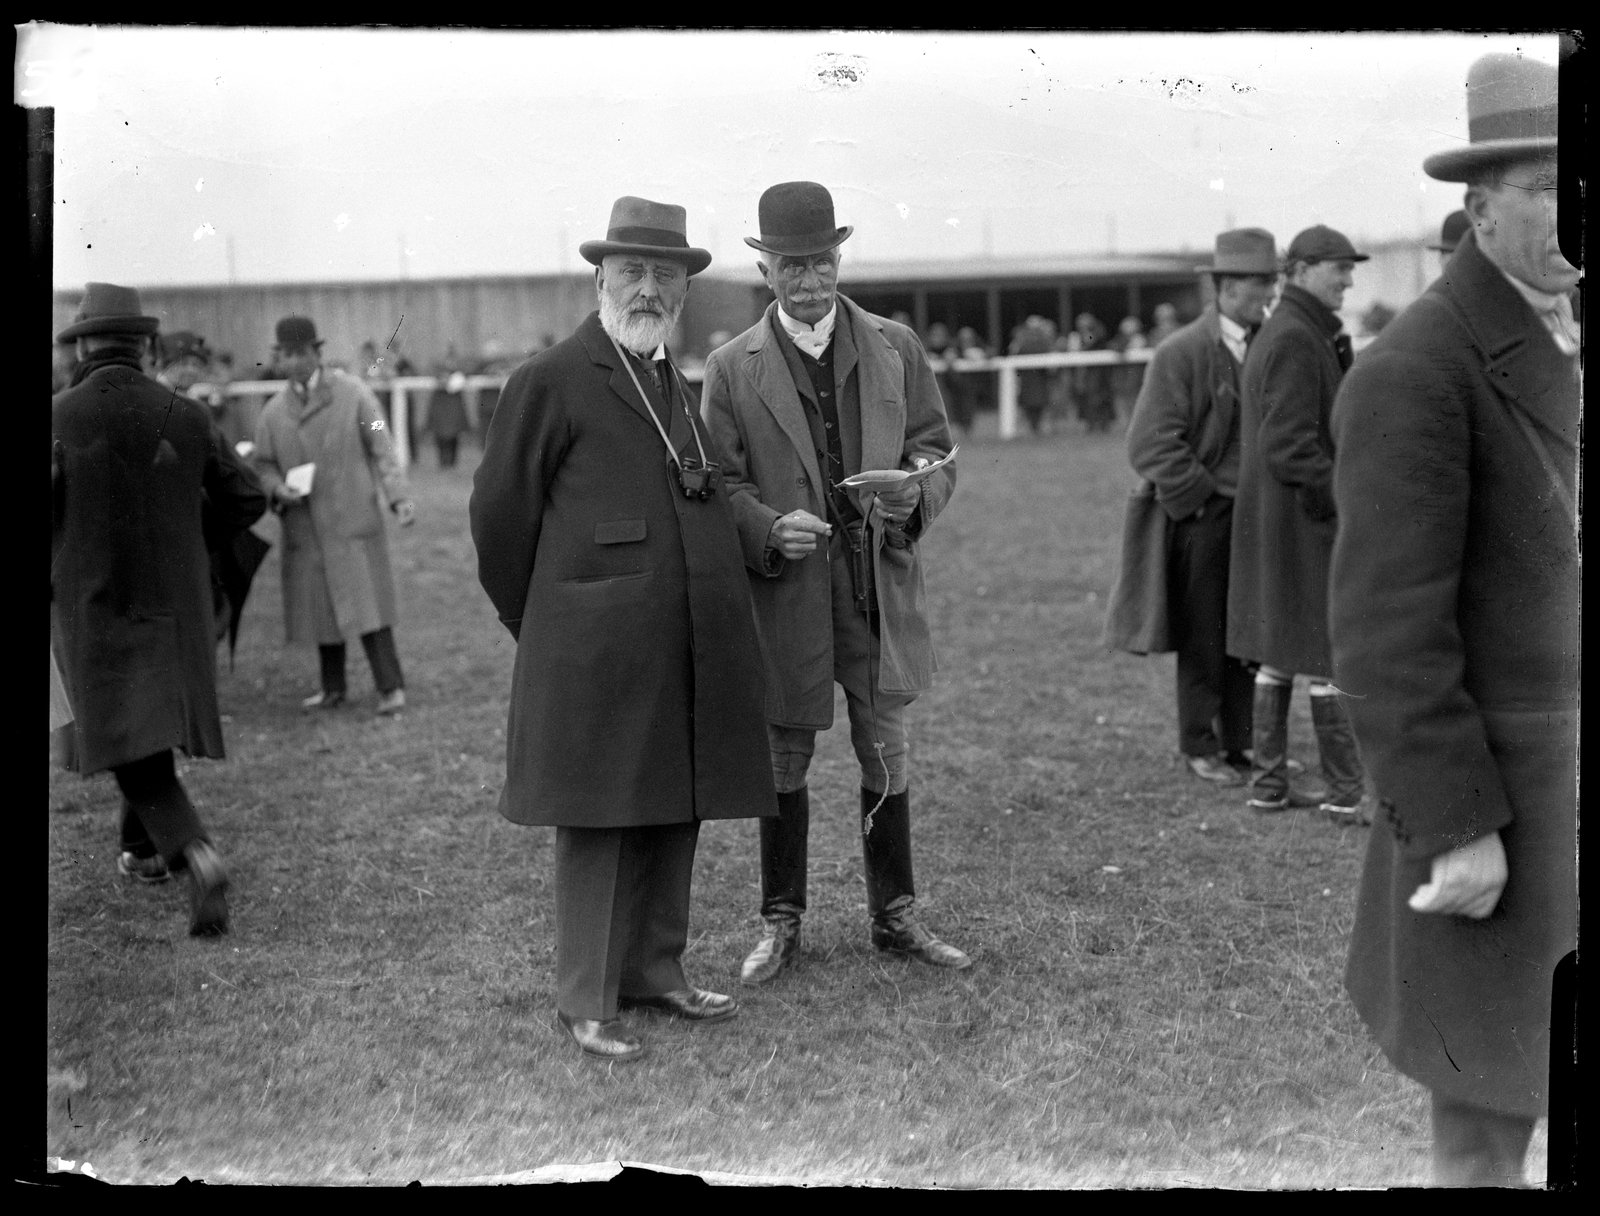 Image - The new Governor General Tim Healy (left) and B.H. Barton at the Dublin Horse Show, mid 1920s. Healy served as the first Governor General of the Irish Free State from 1922-1928. Photo © RTÉ Photographic Archive